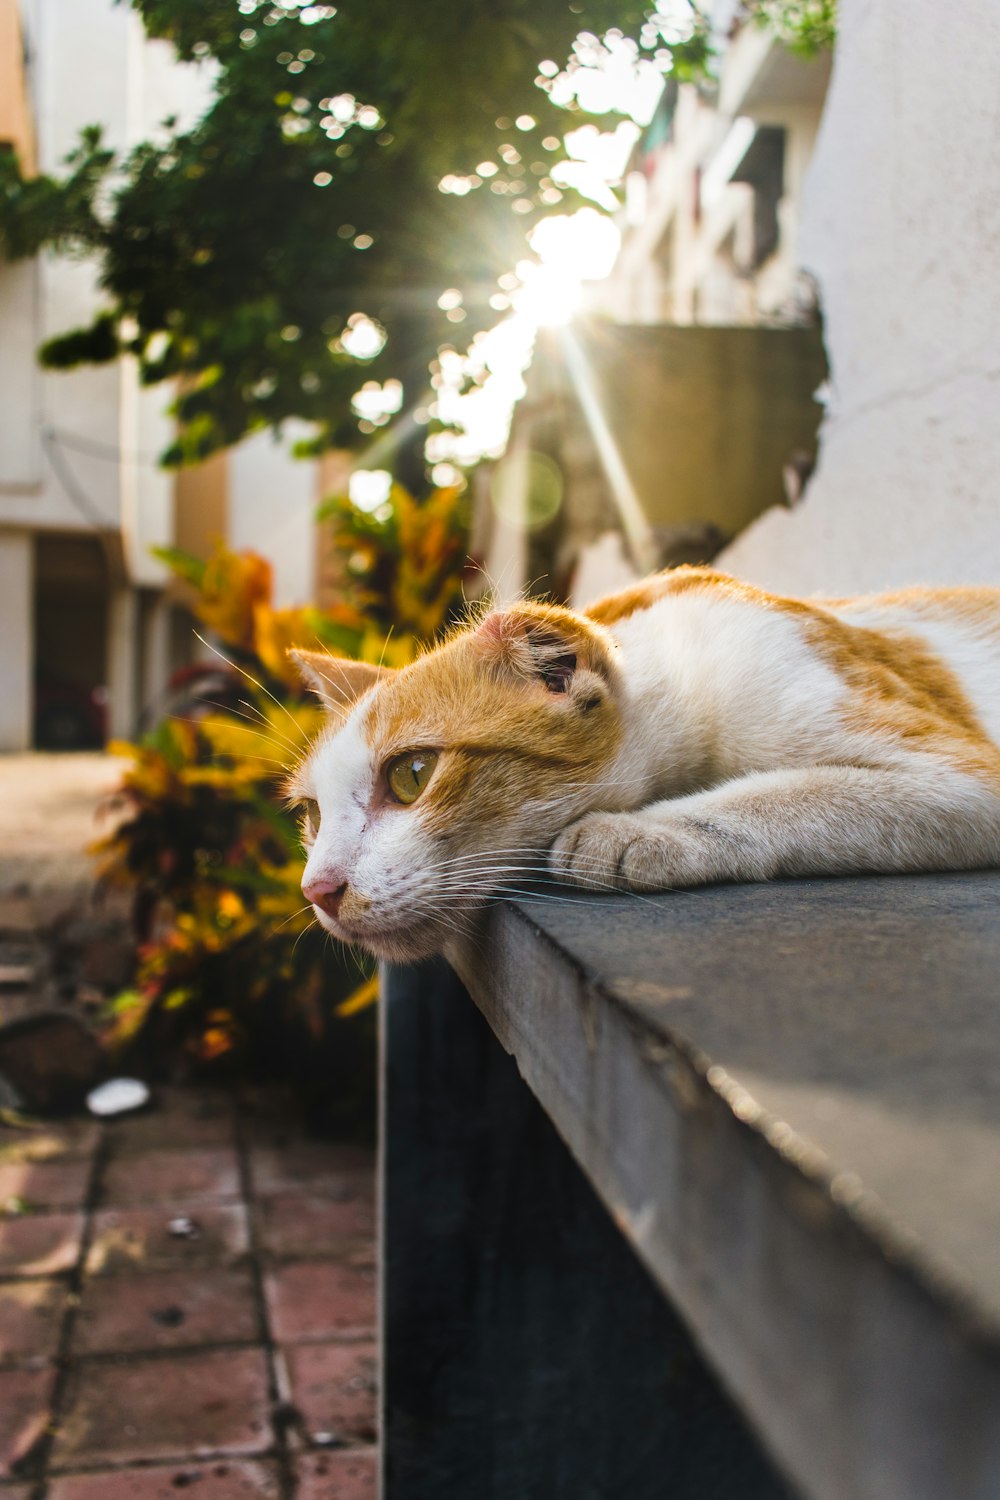 orange and white cat lying on concrete floor during daytime